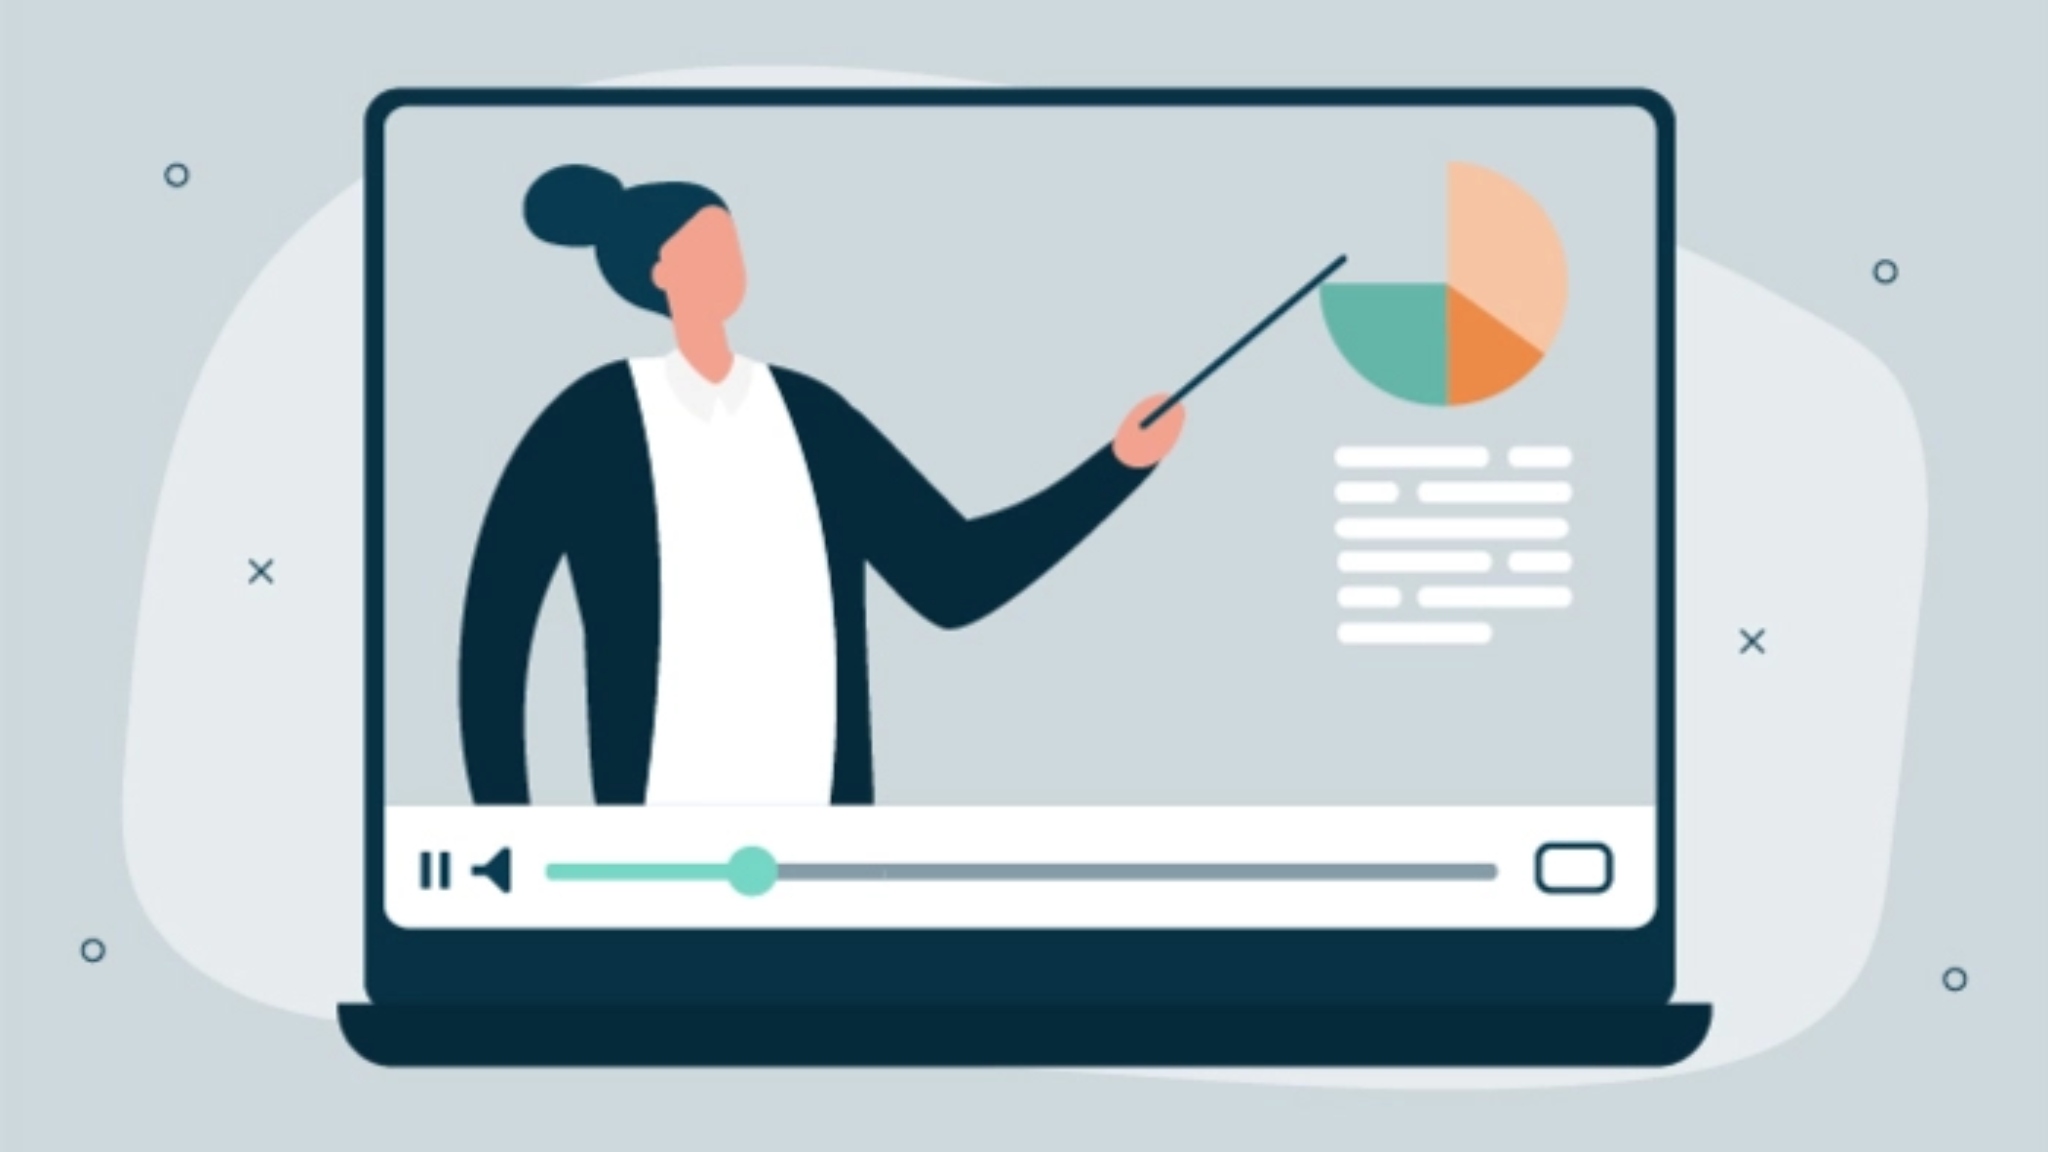 Illustration of woman pointing at lesson plan through a video for tutoring through custom video conferencing